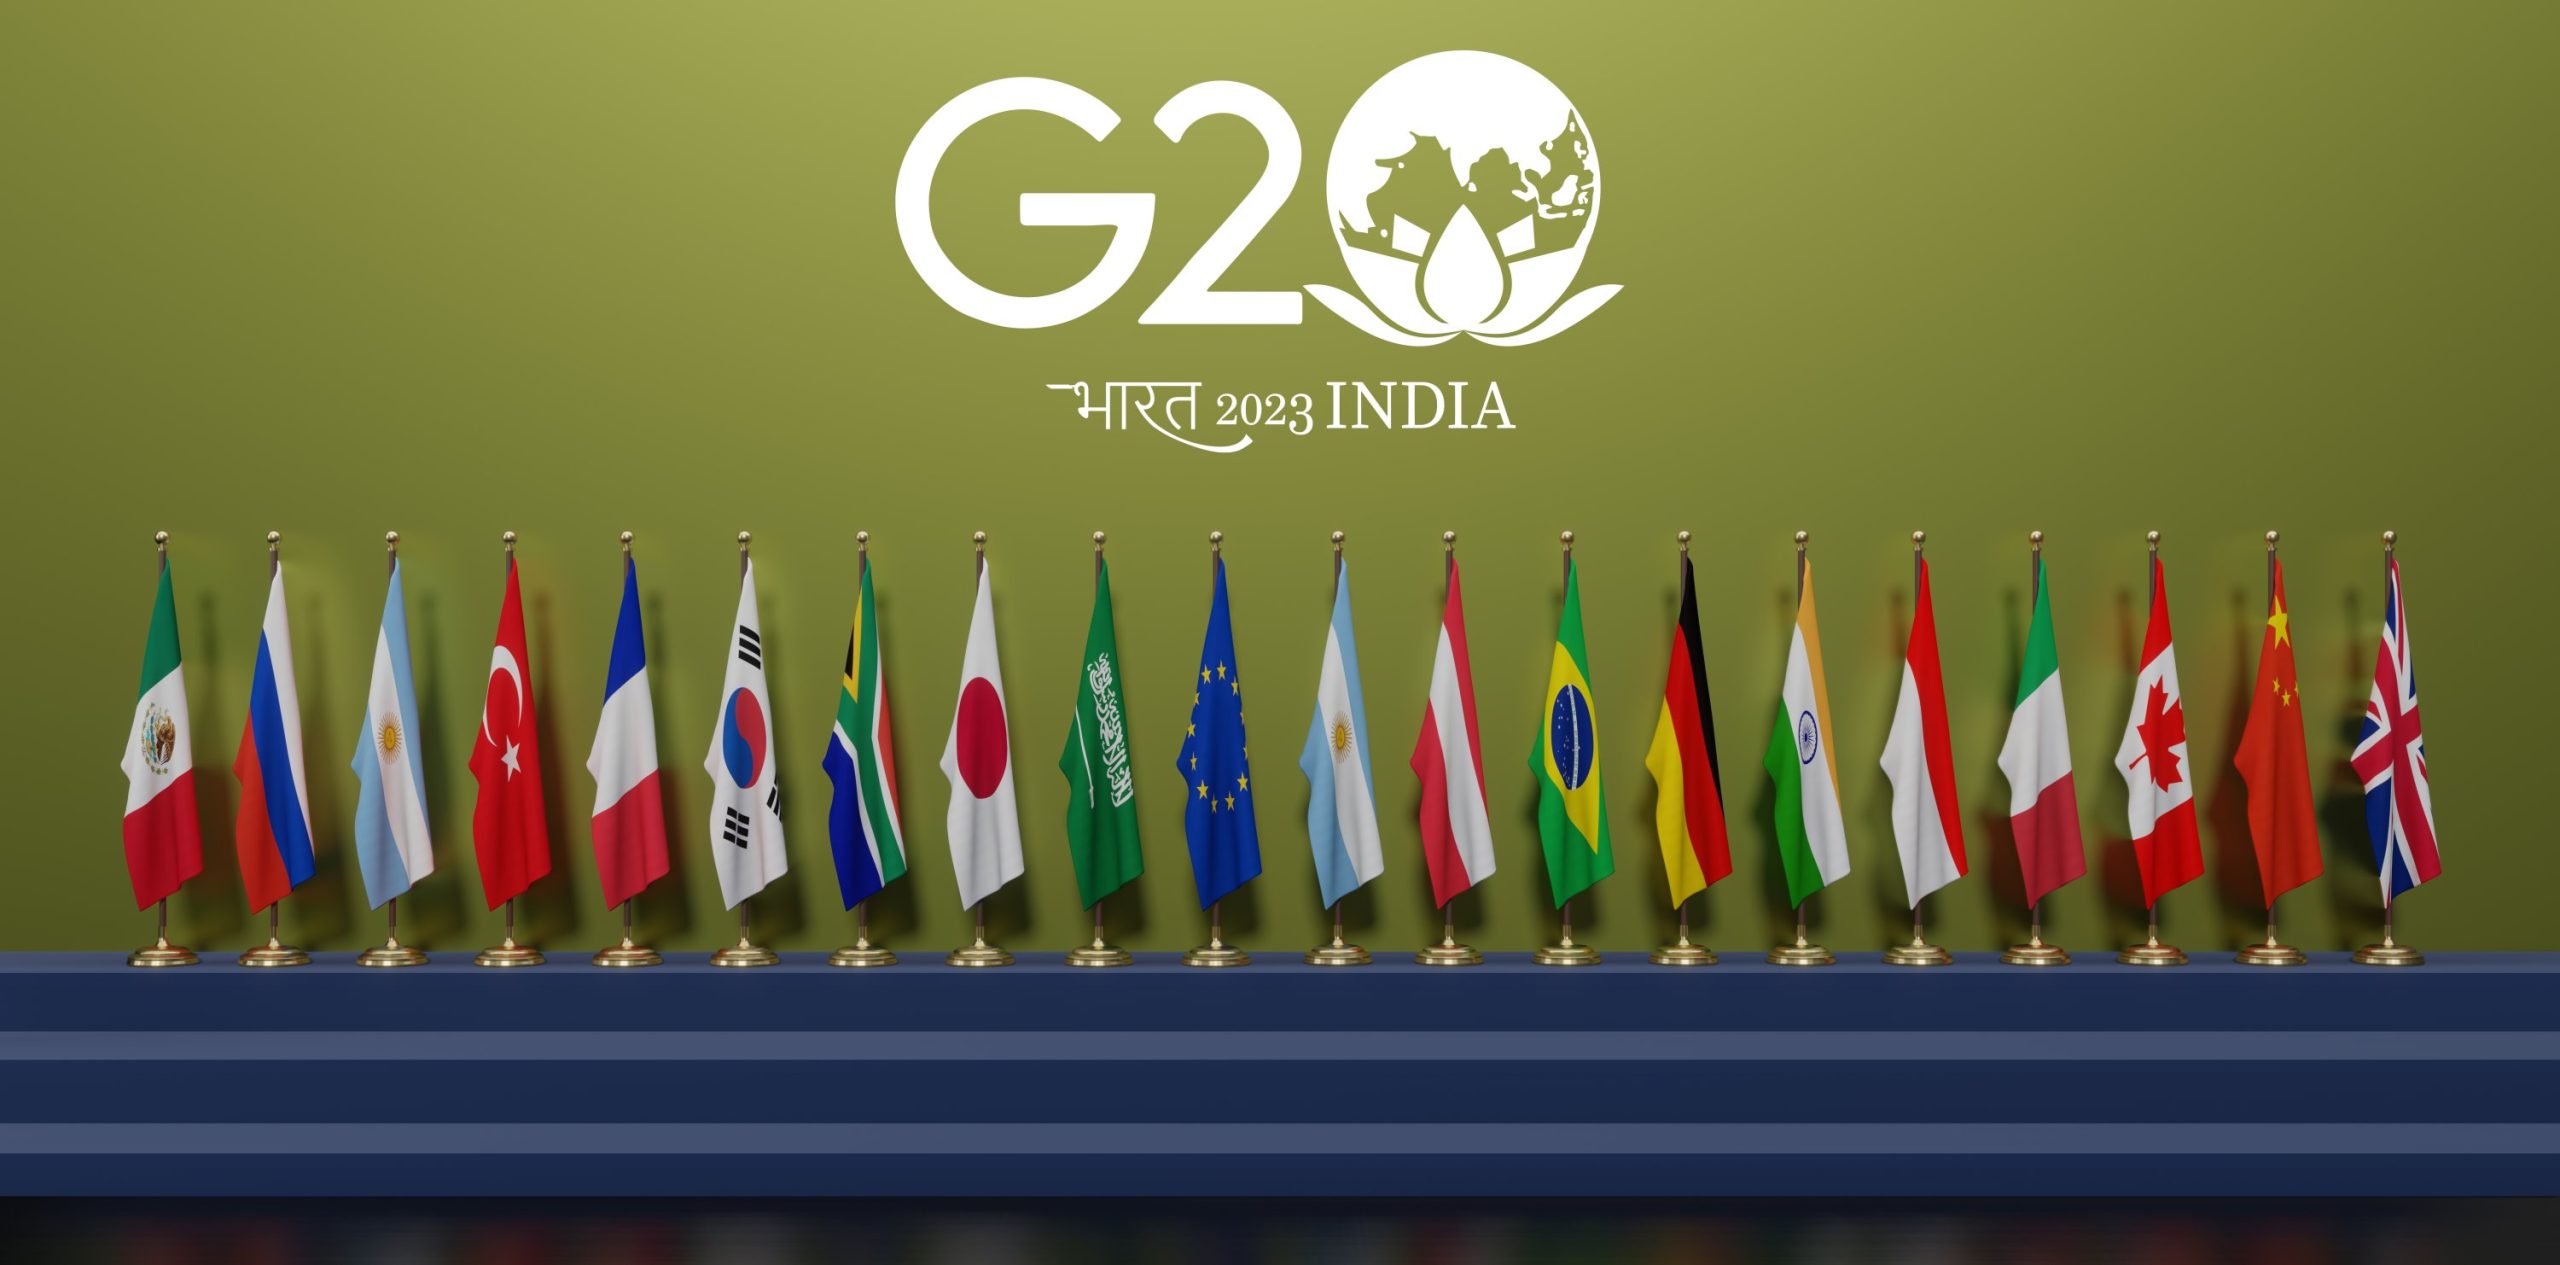 essay on india and g20